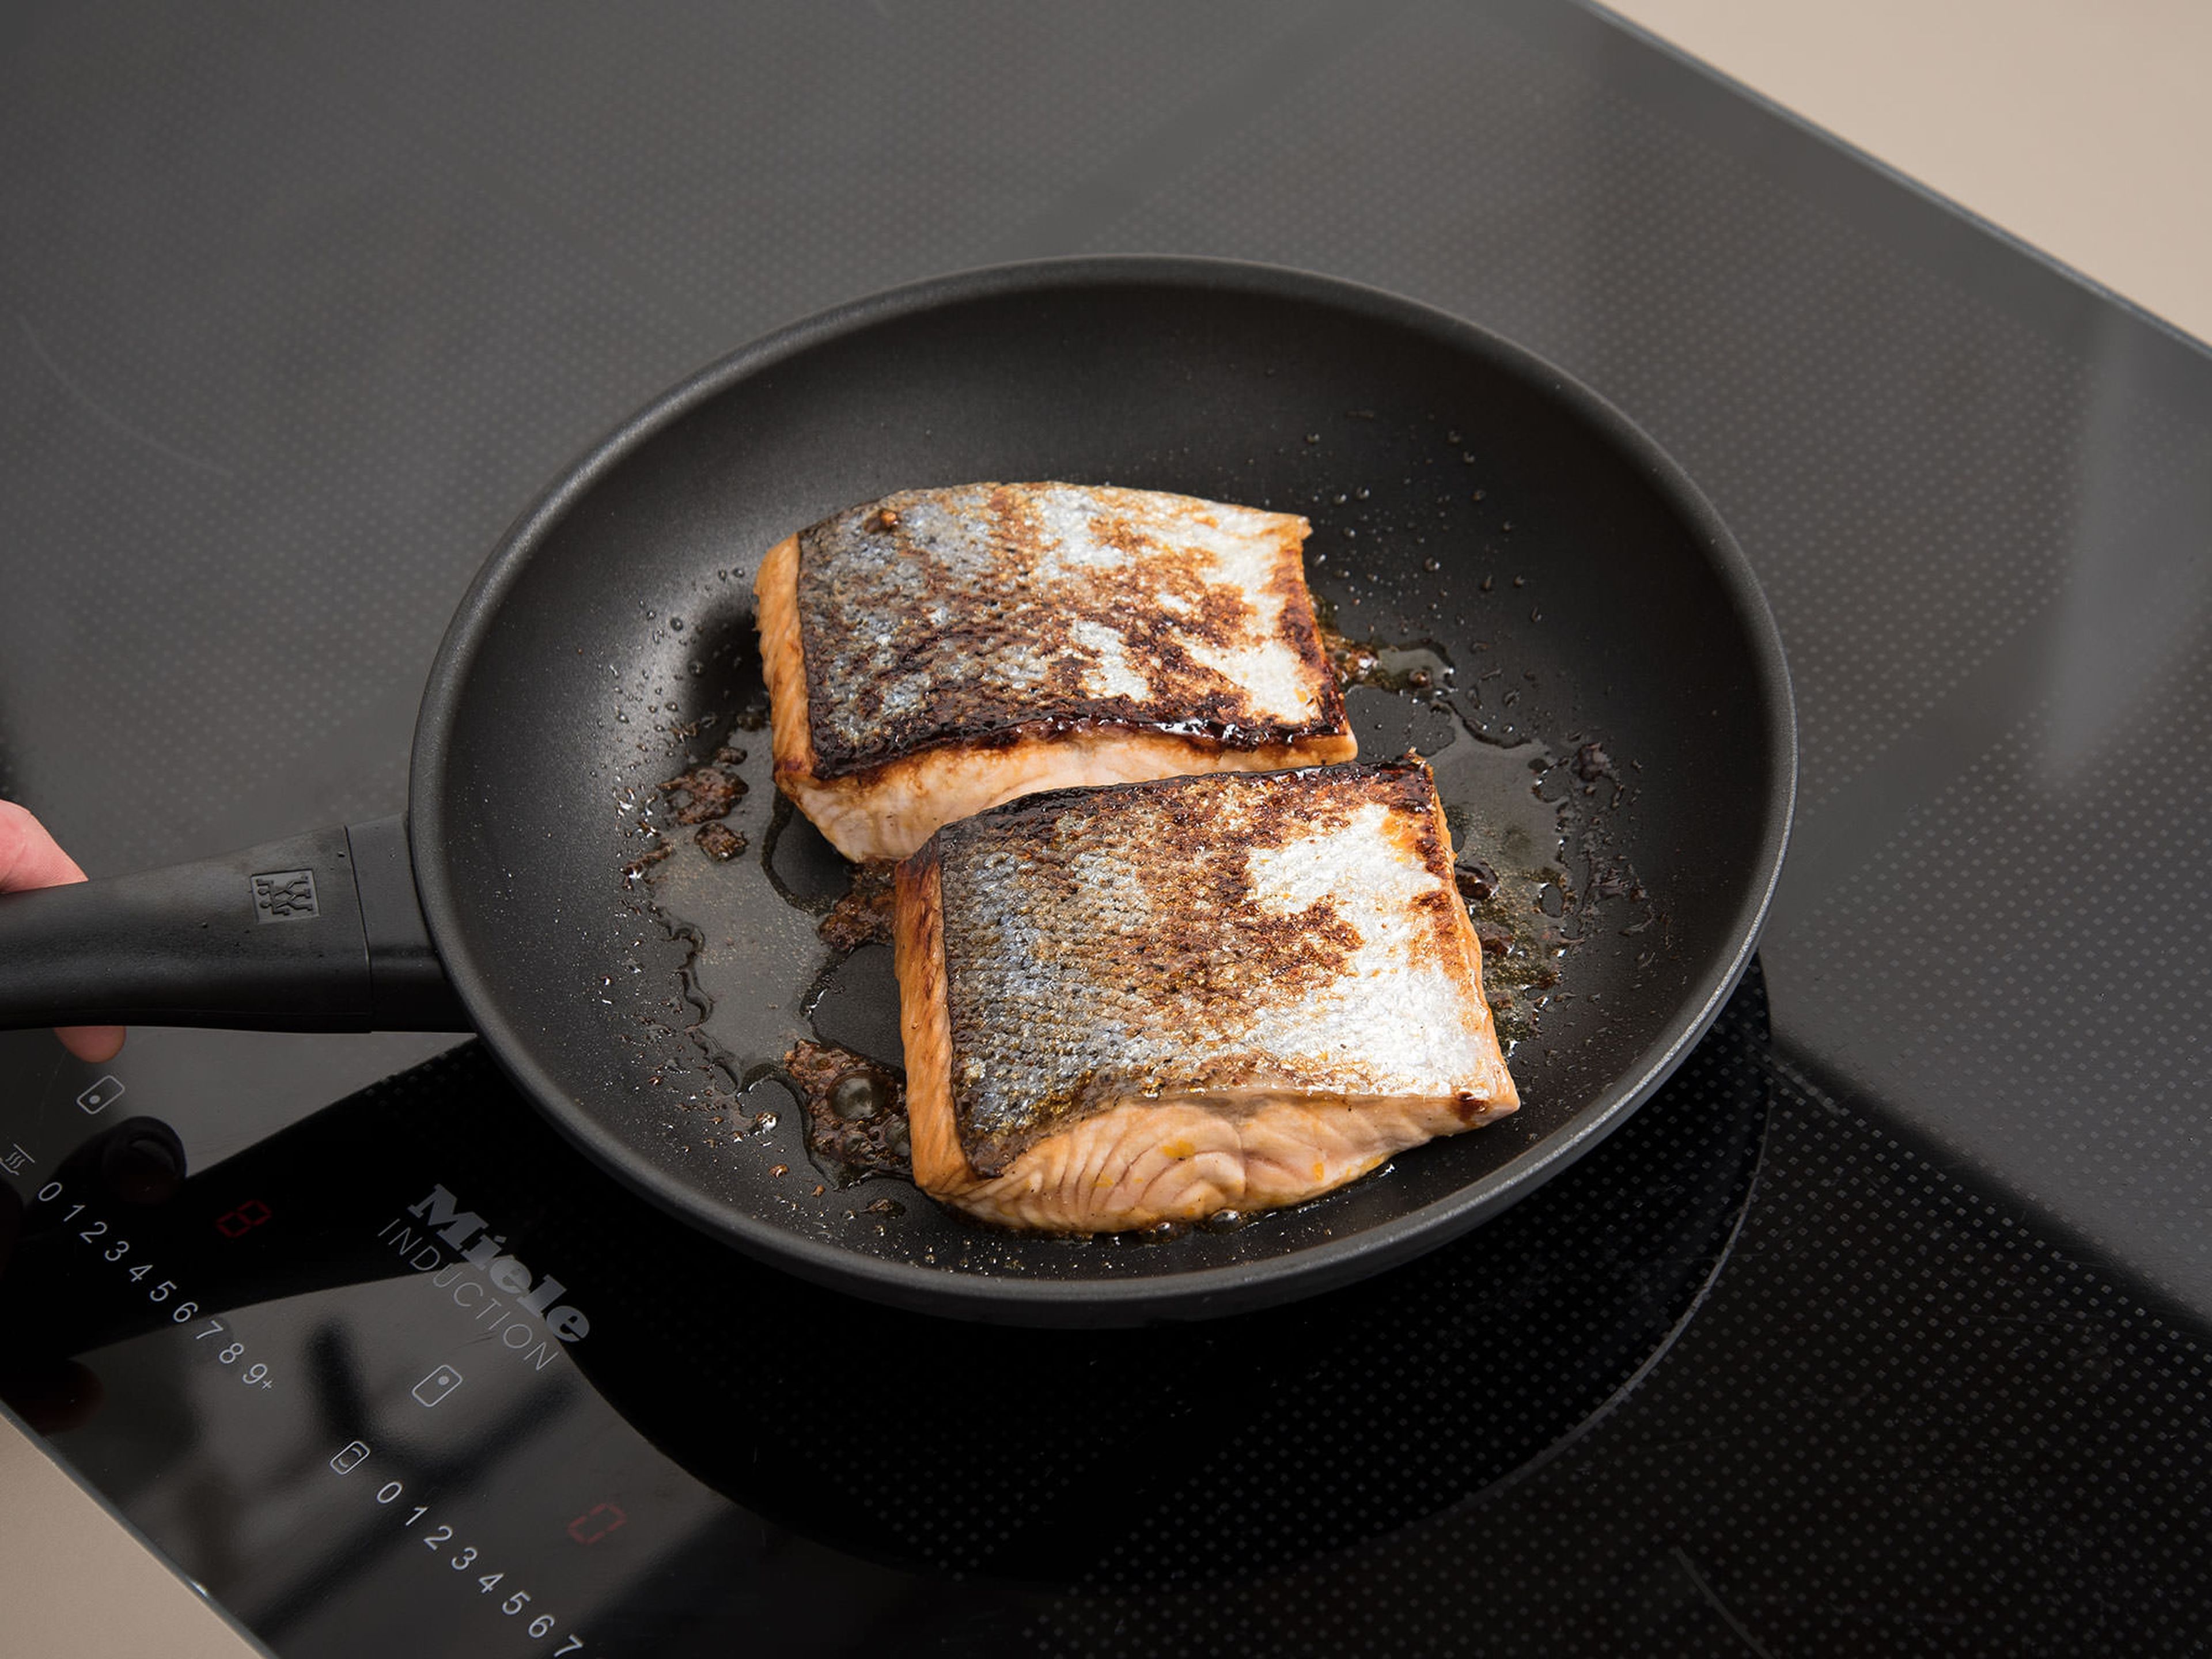 Heat the rest of the olive oil in a frying pan over medium-high heat, and fry the salmon skin side down for approx. 2 min. Flip the fillets over and brush with remaining syrup. Cook for another 3 - 4 min. or until cooked to desired level of doneness.